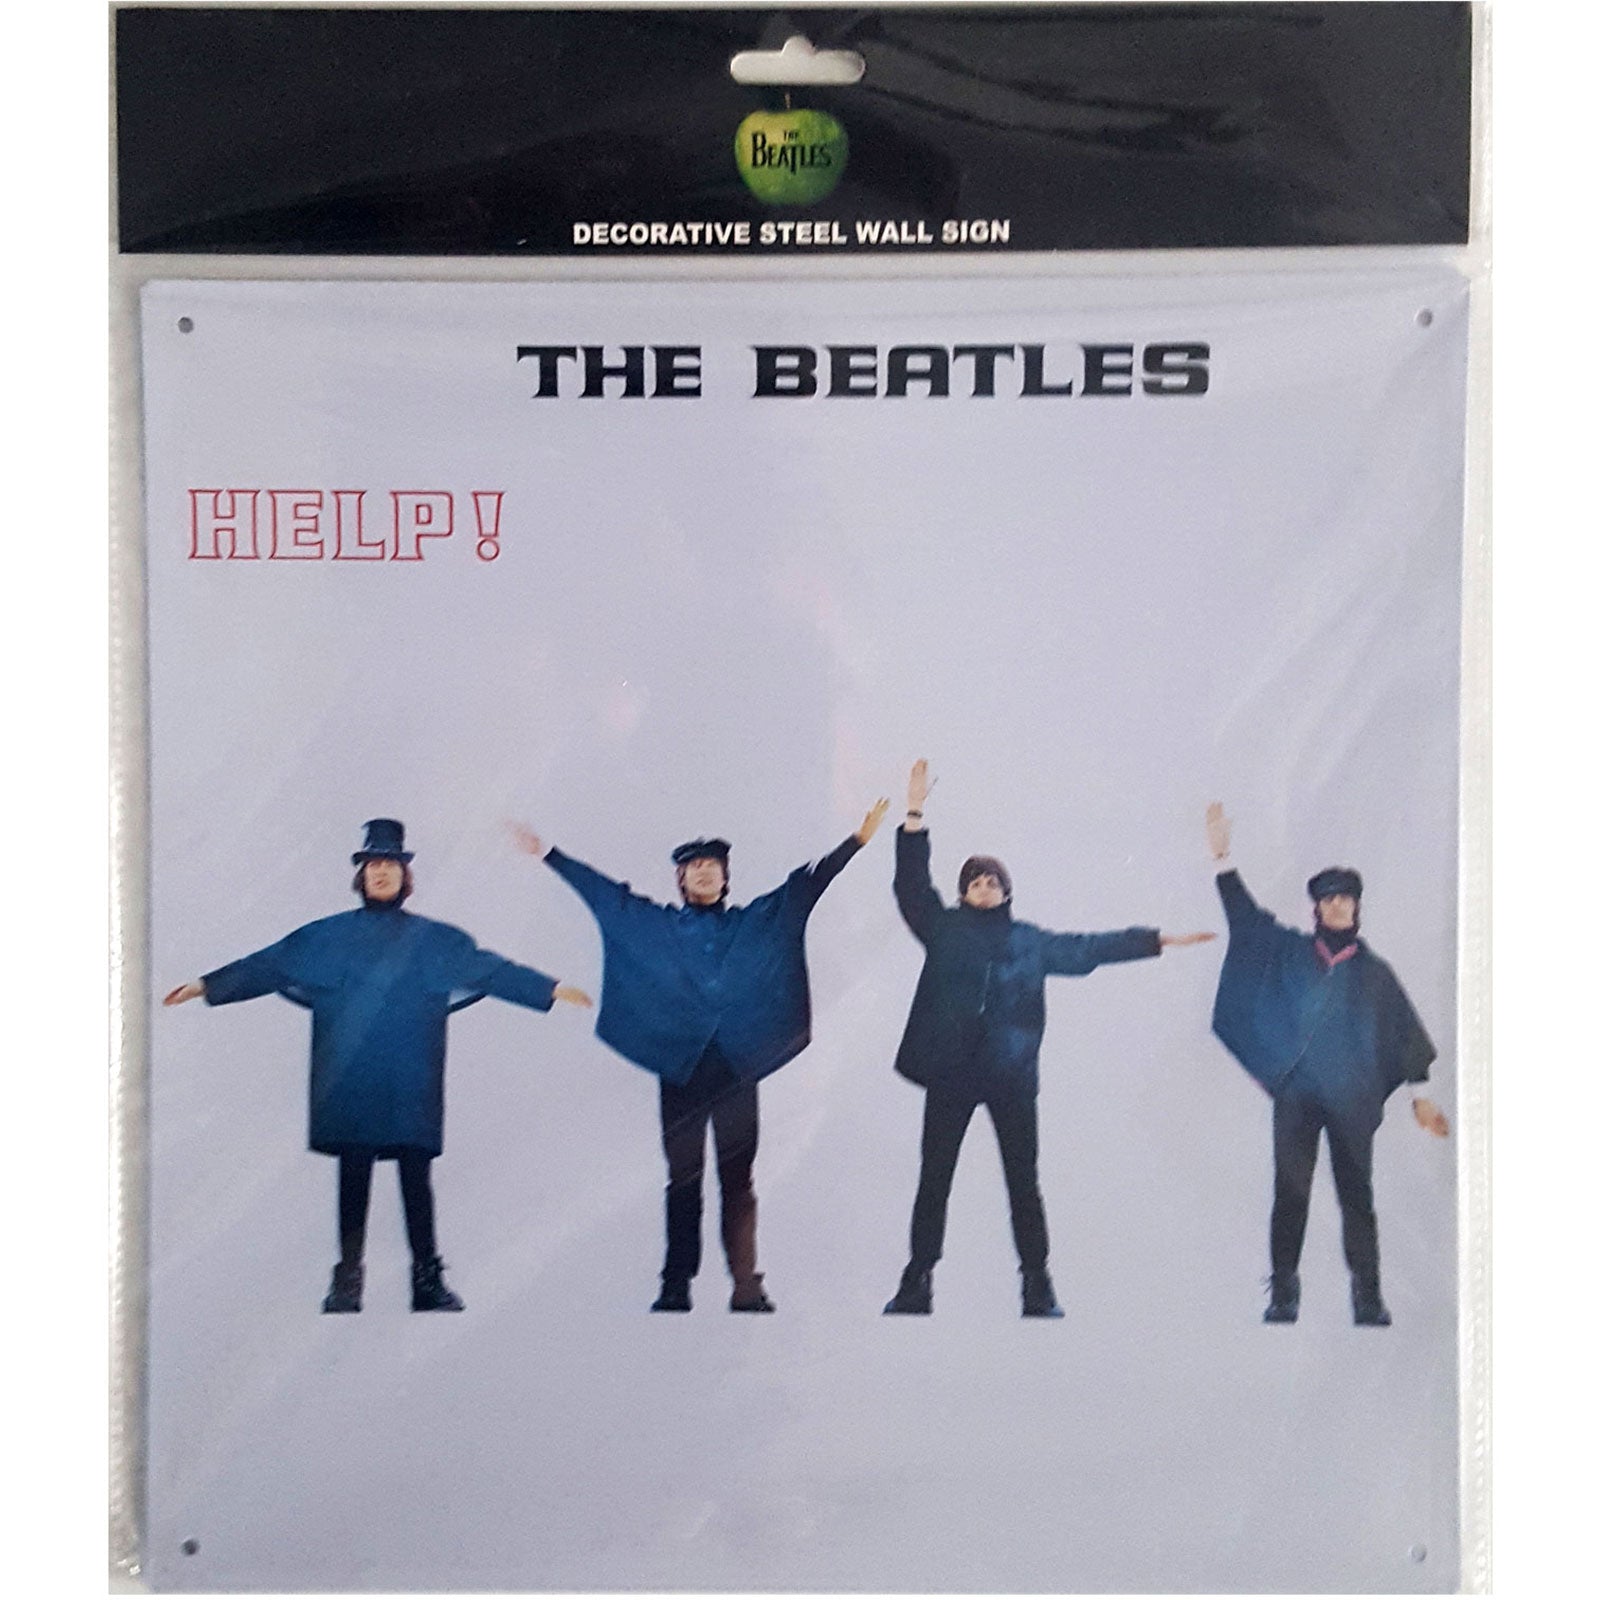 The Beatles Steel Wall Sign: Help!